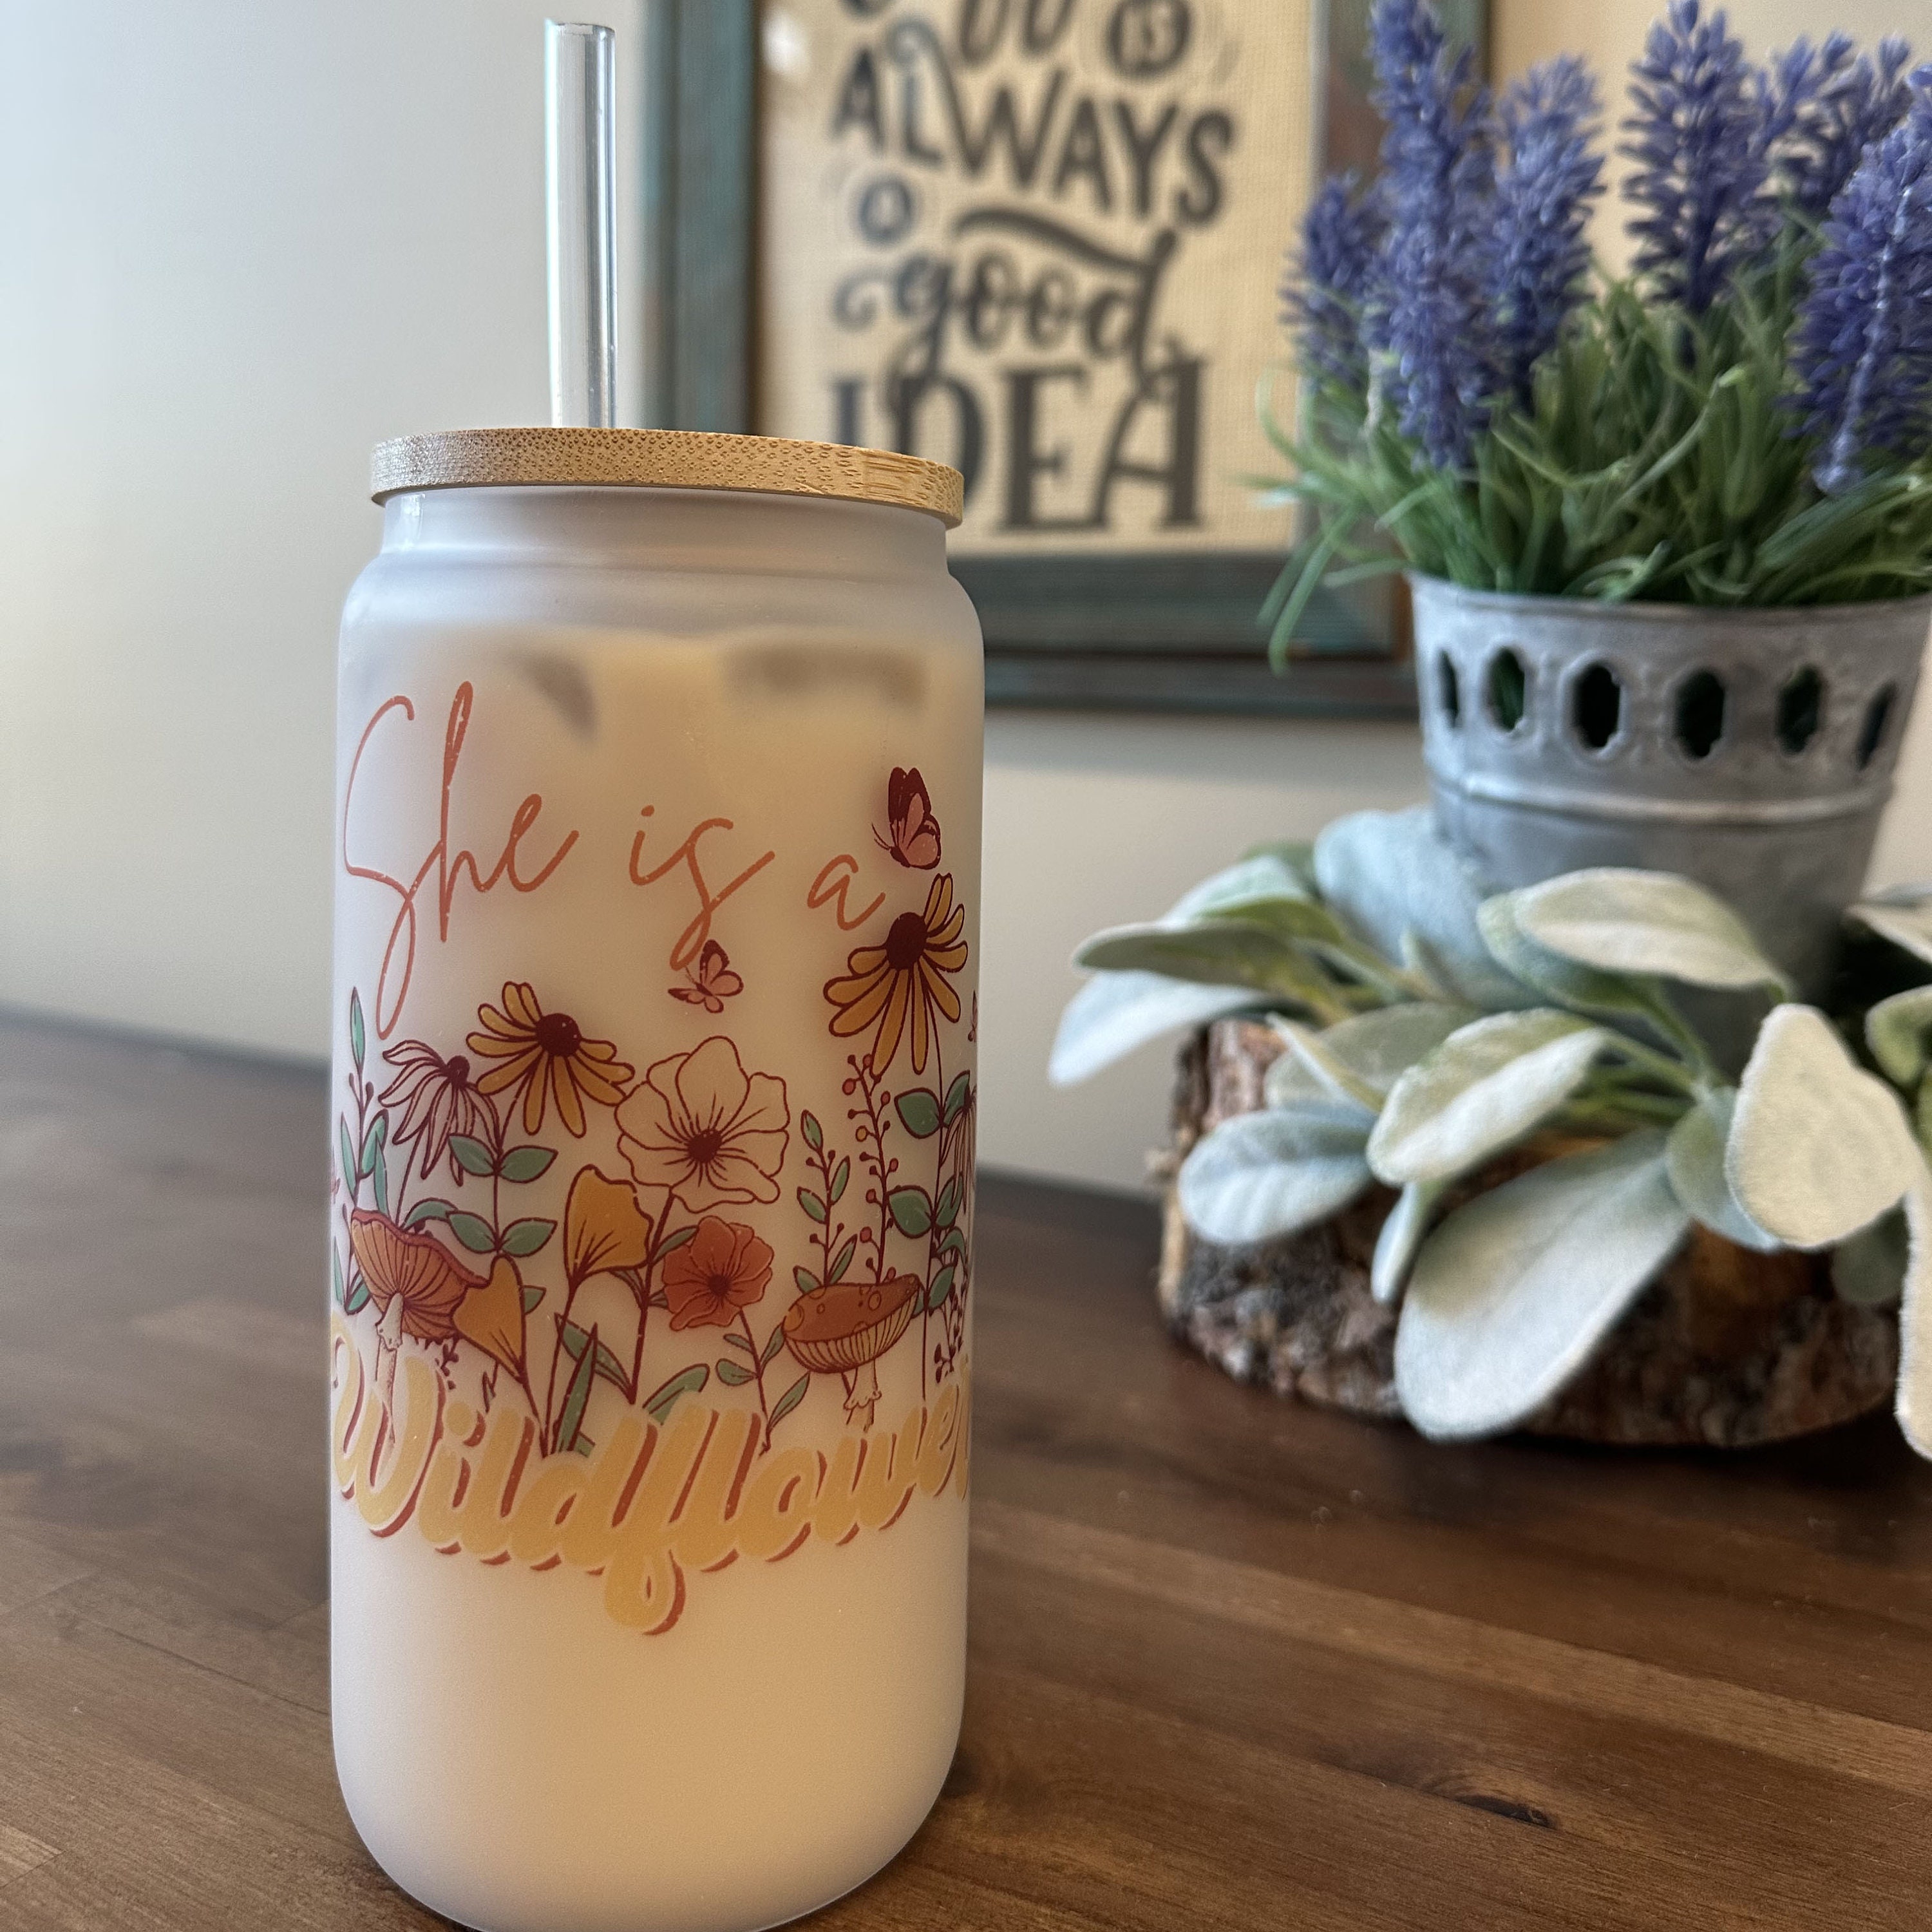 Glass Cup with Lid & Straw - Floral Pink – She She Boutique